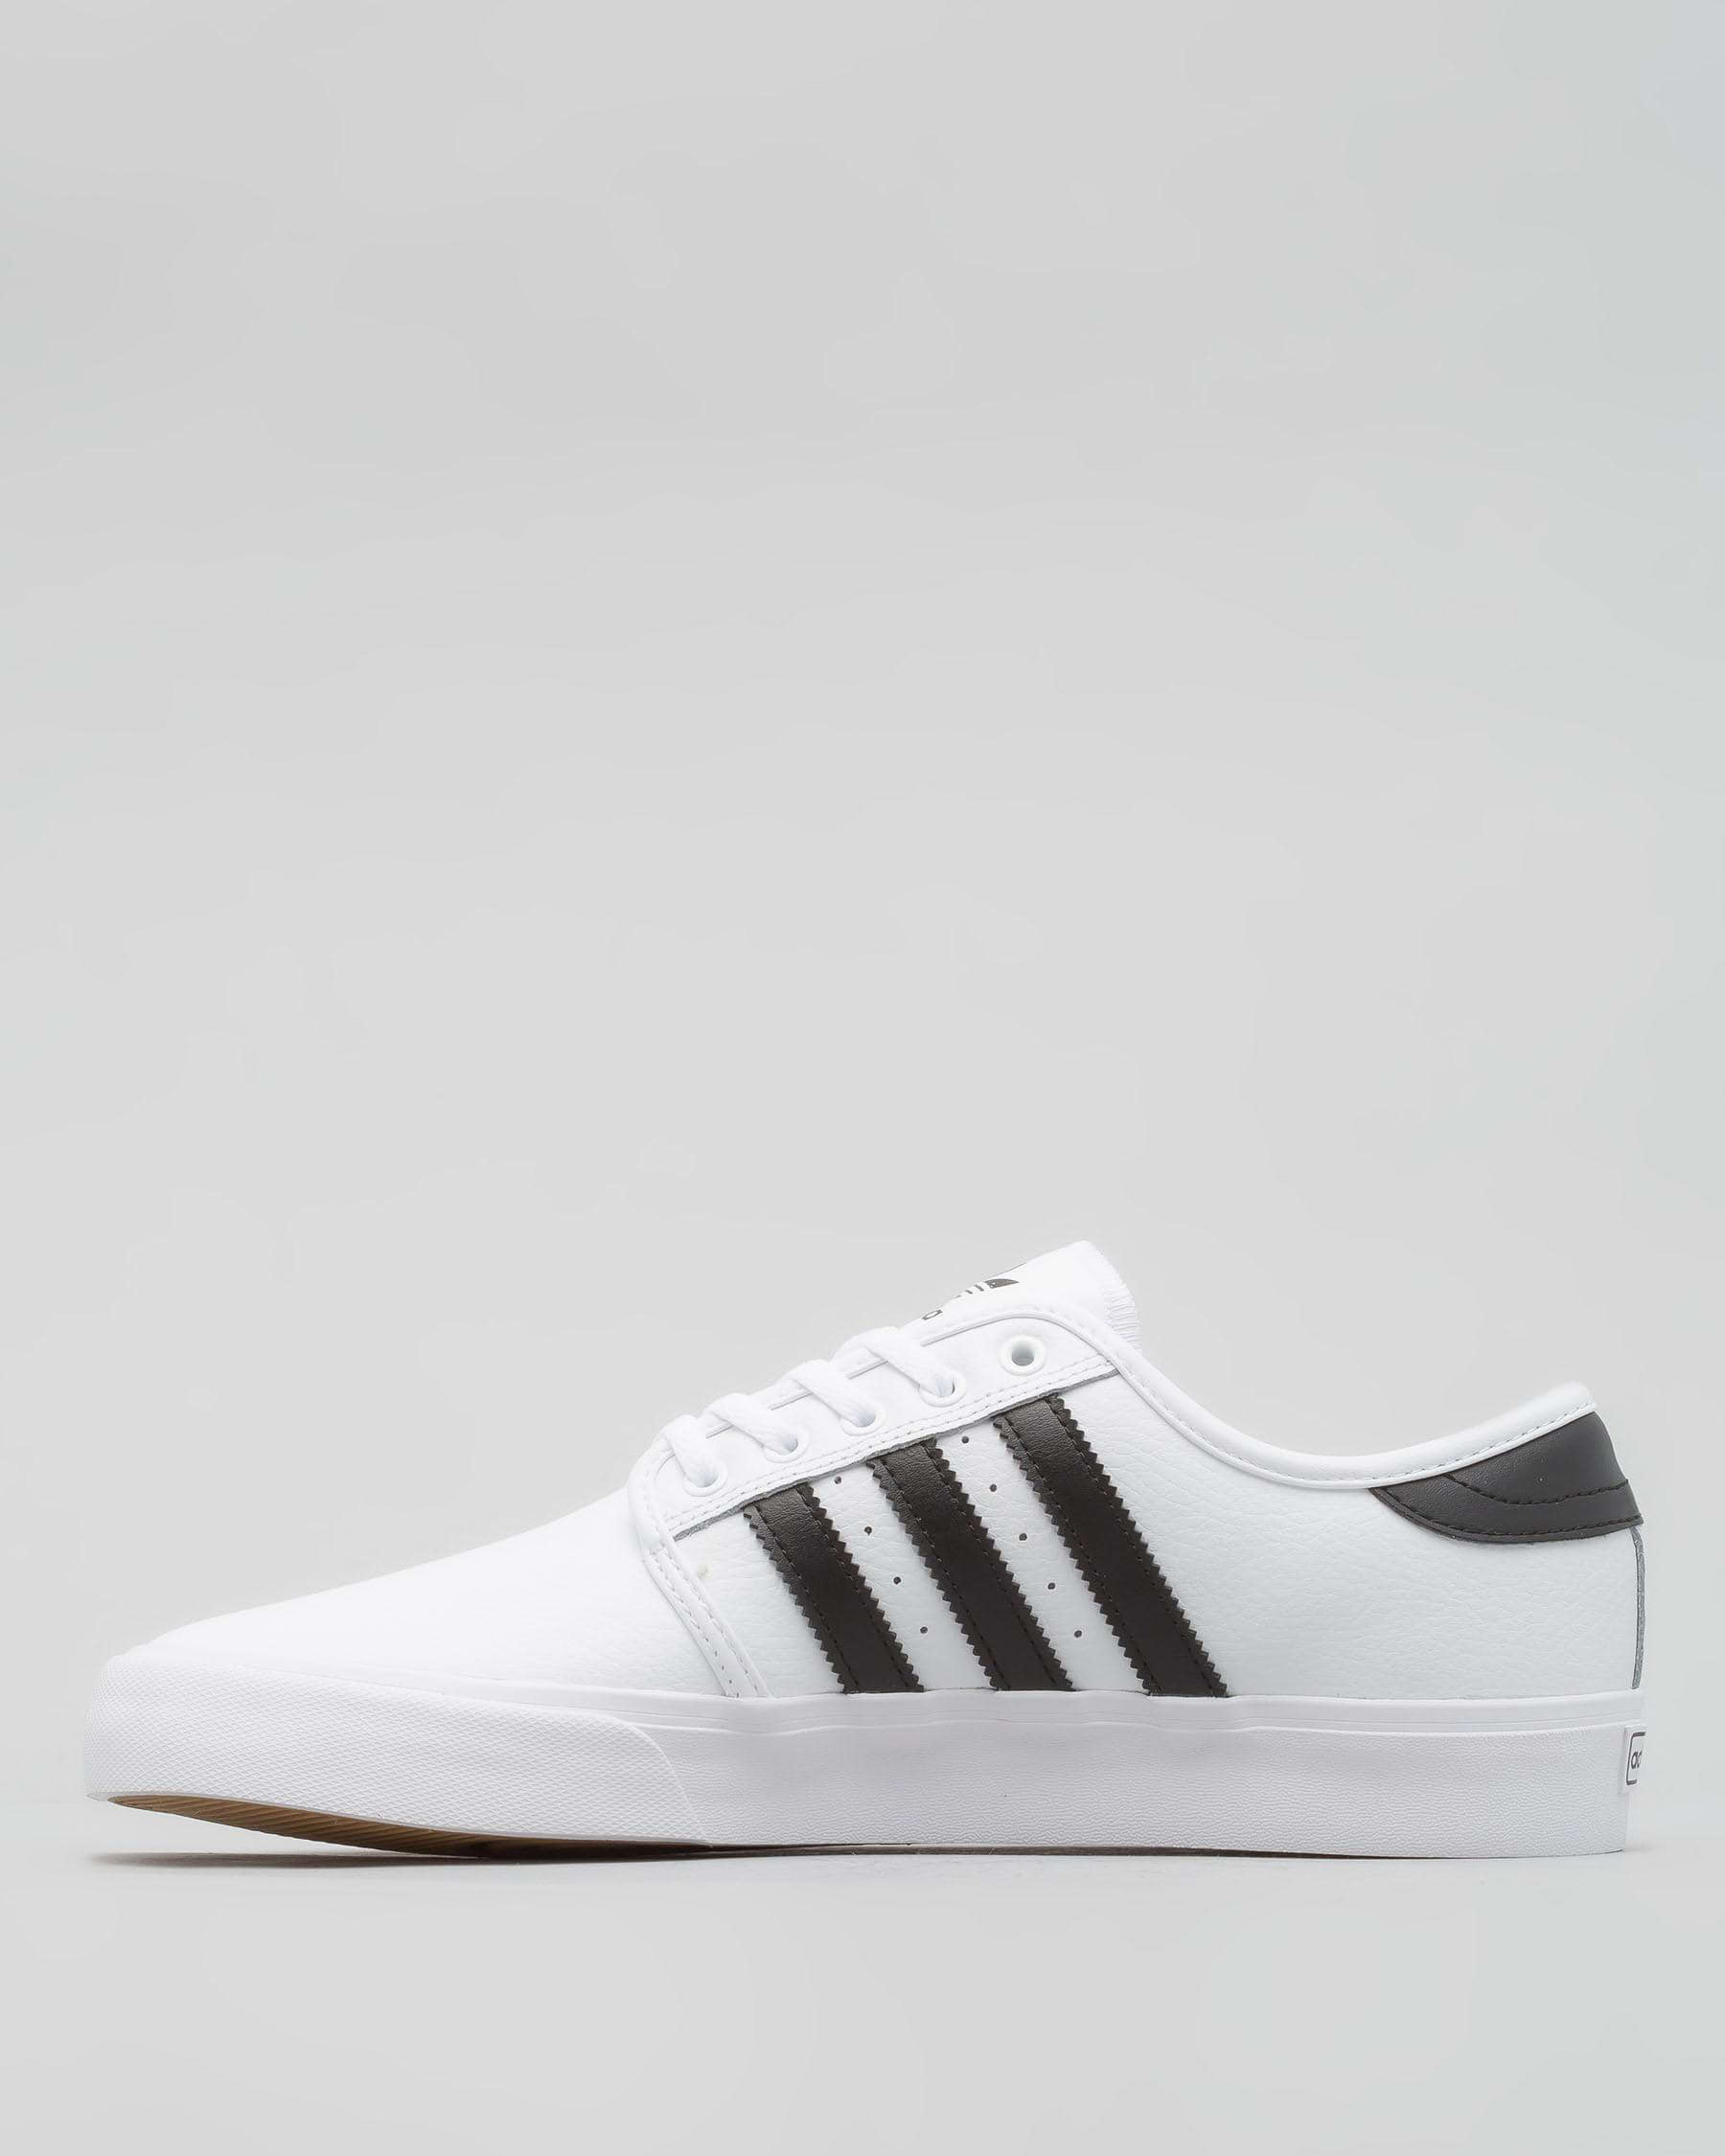 Adidas Seeley XT Shoes In Ftwr White/core Black/mgh - Fast Shipping ...